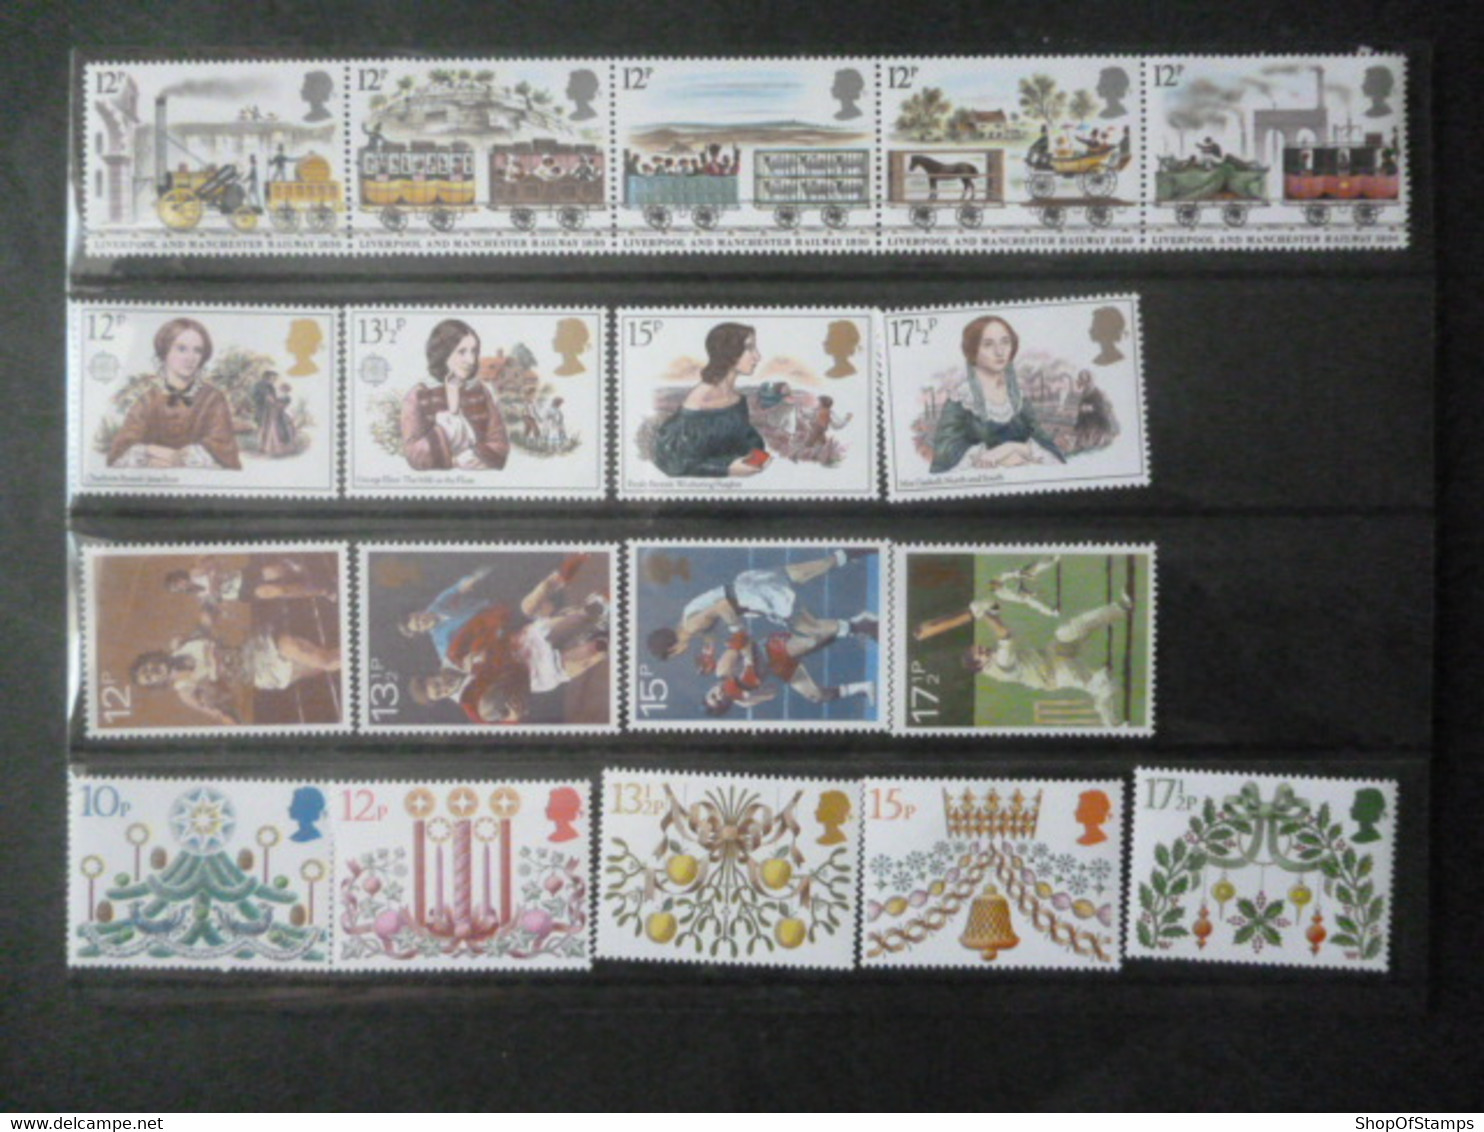 GREAT BRITAIN SG 1980 COLLECTION PACK WITH ALL ISSUES - Sheets, Plate Blocks & Multiples